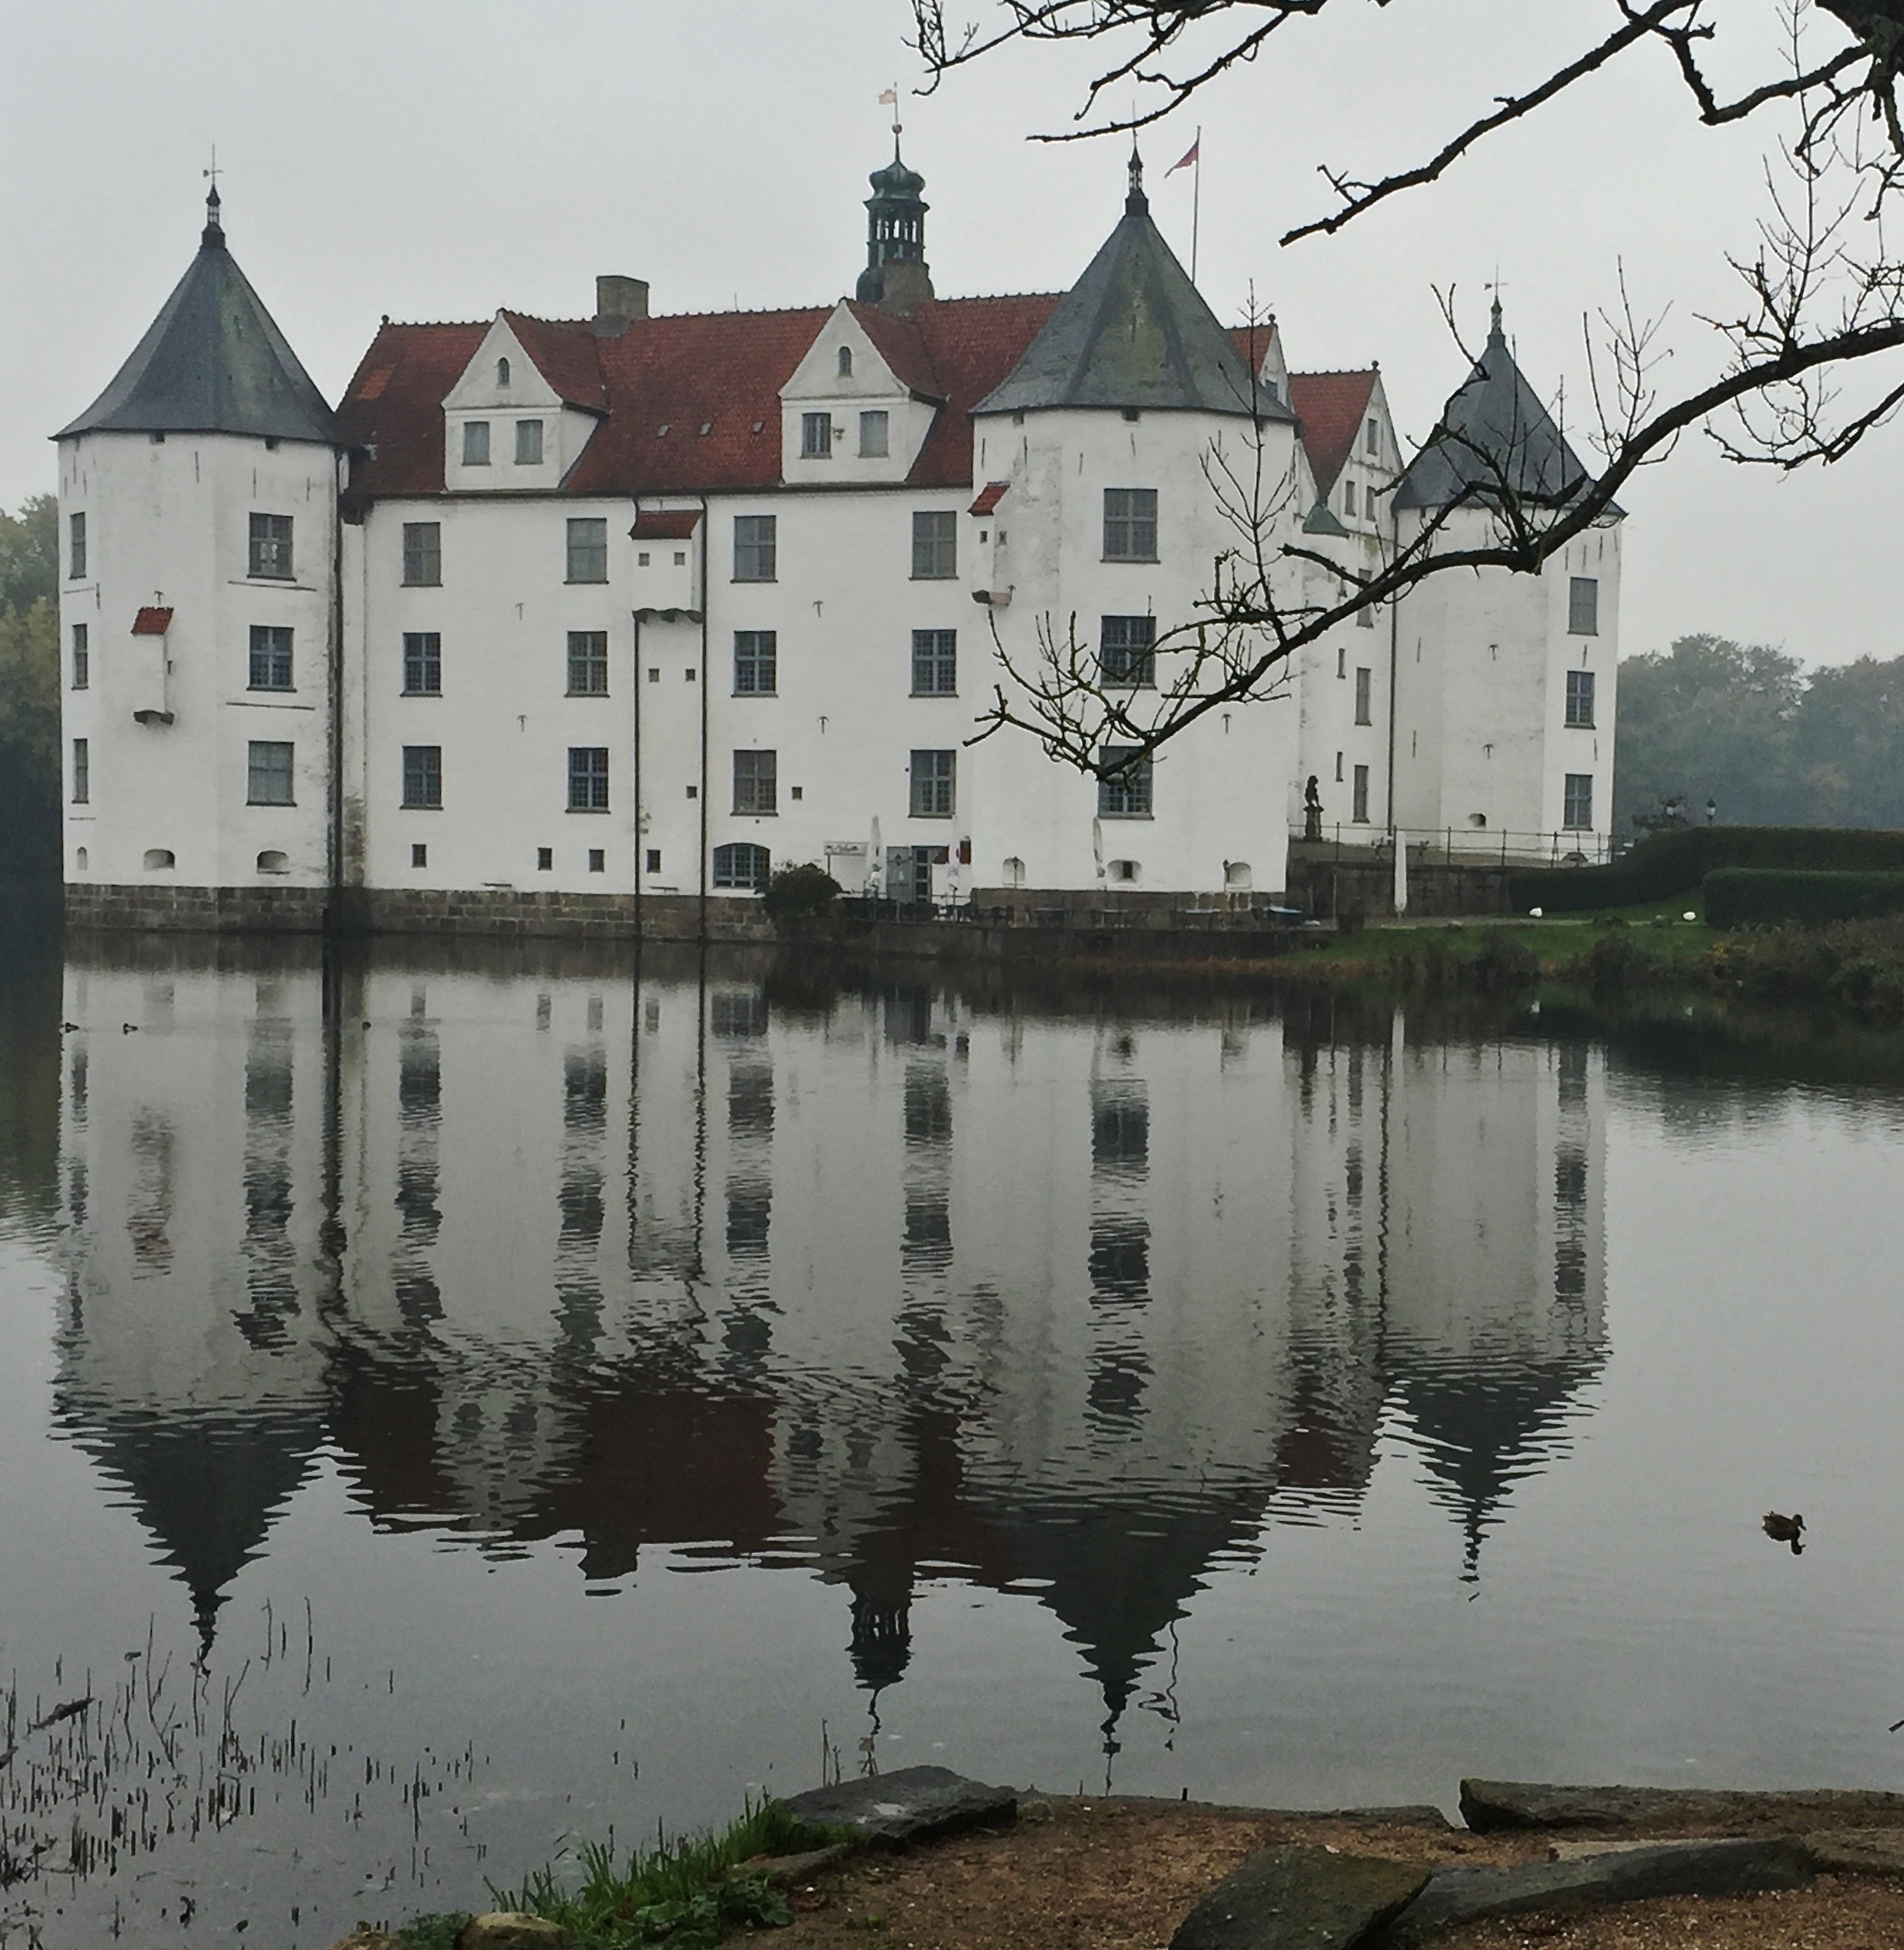 white and maroon concrete castle near body of water